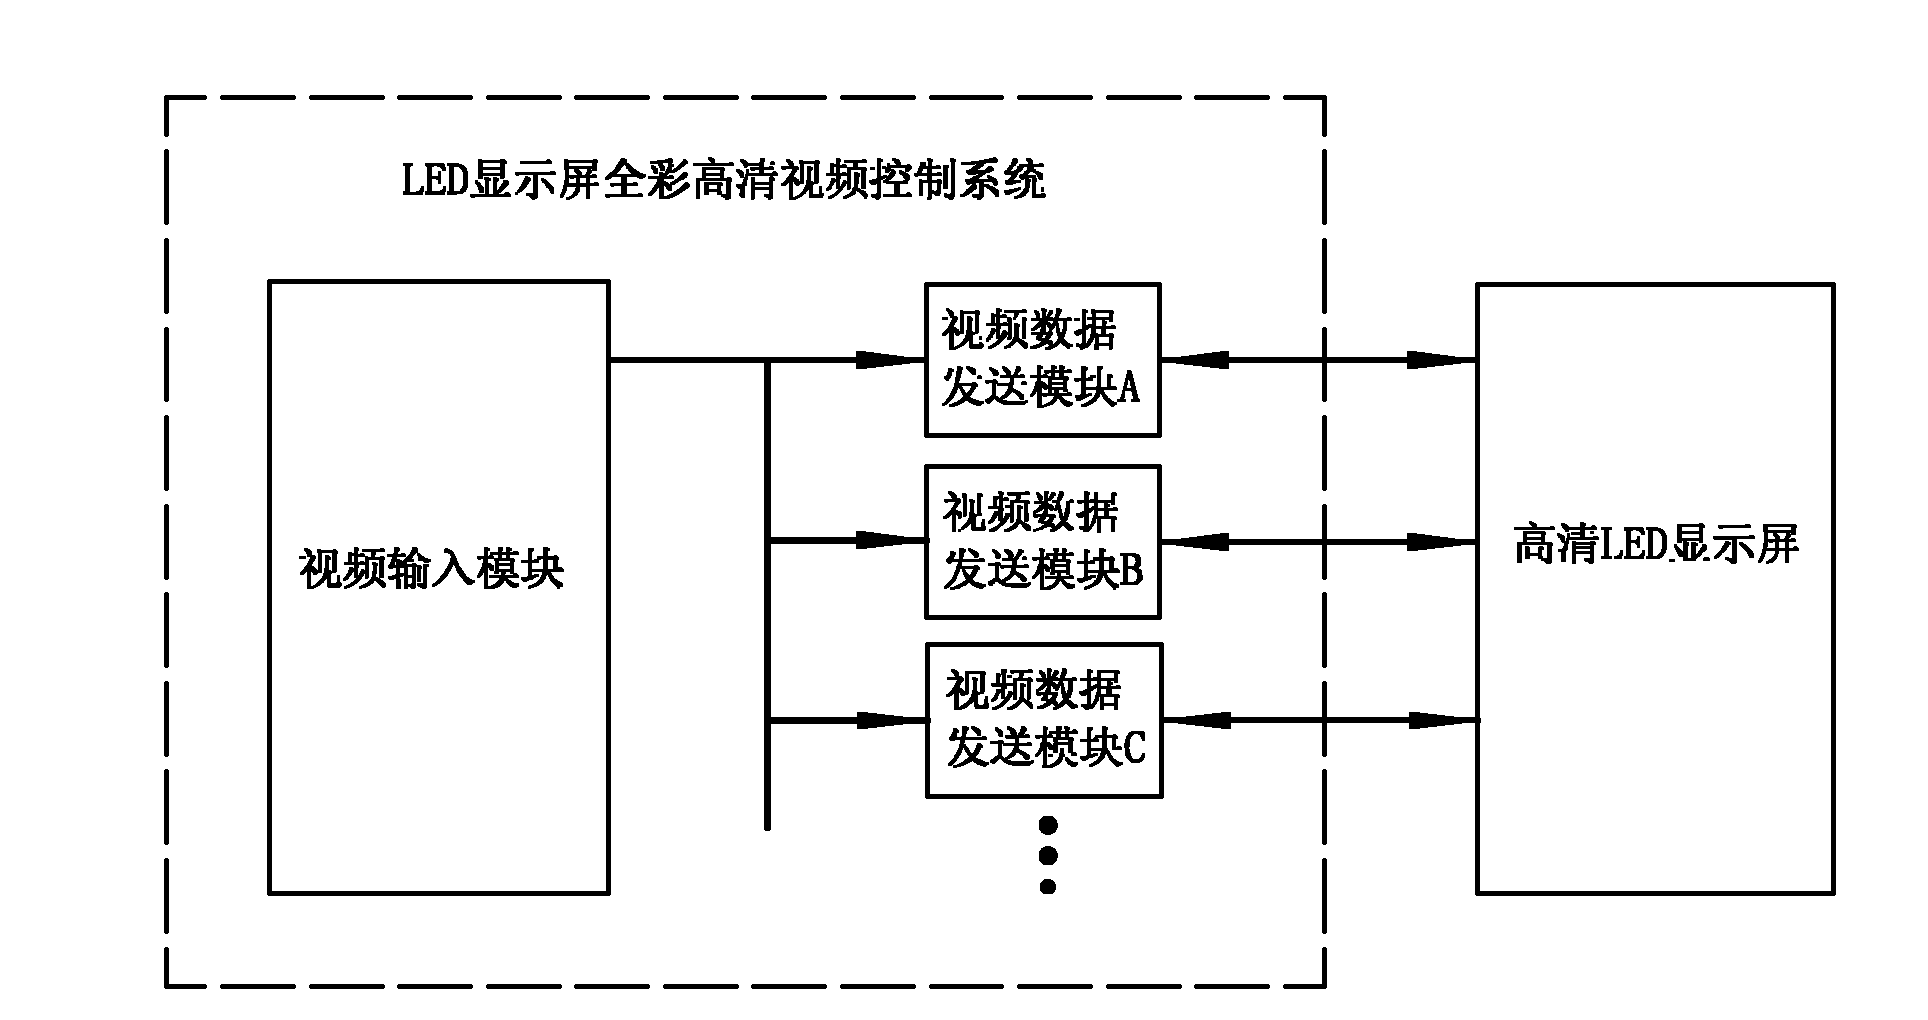 Full-color high-definition video control system for light-emitting diode (LED) display screen